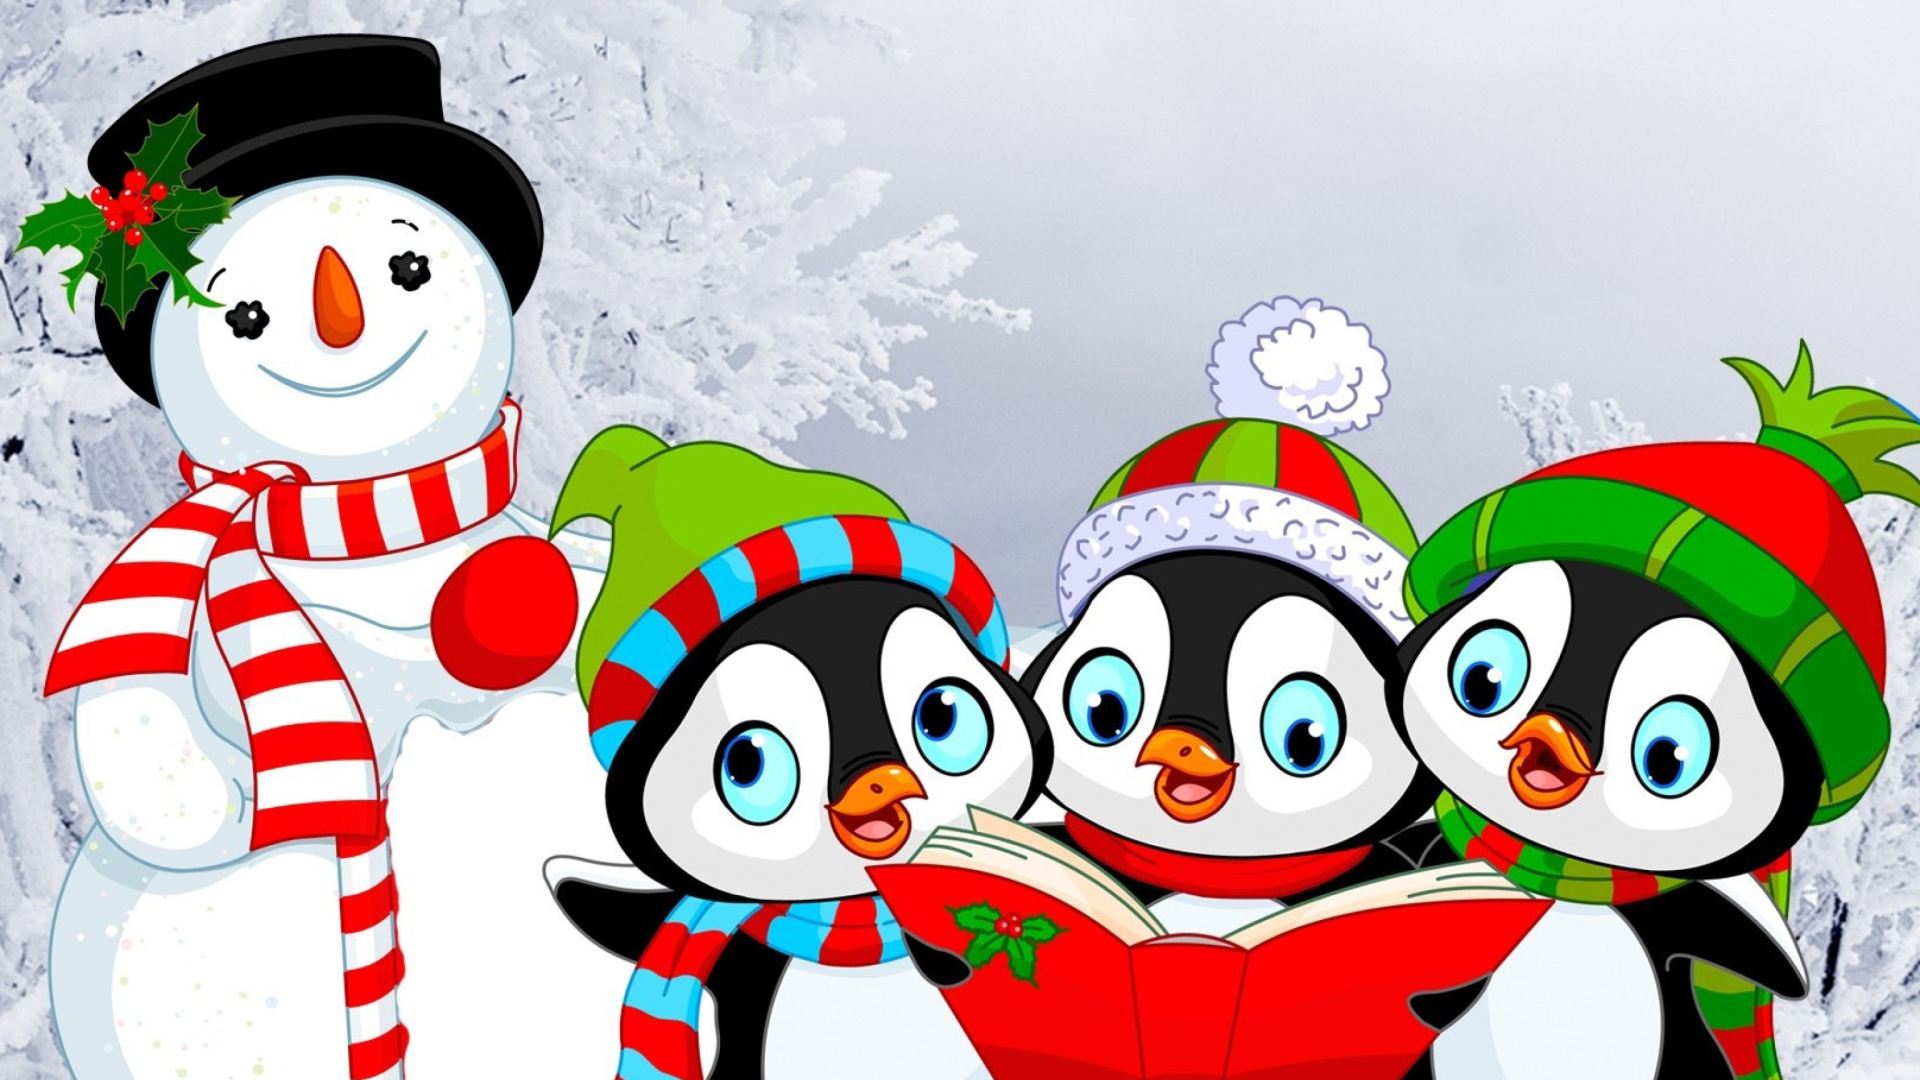 Snowman and Penguin Toys wallpaper 1920x1080